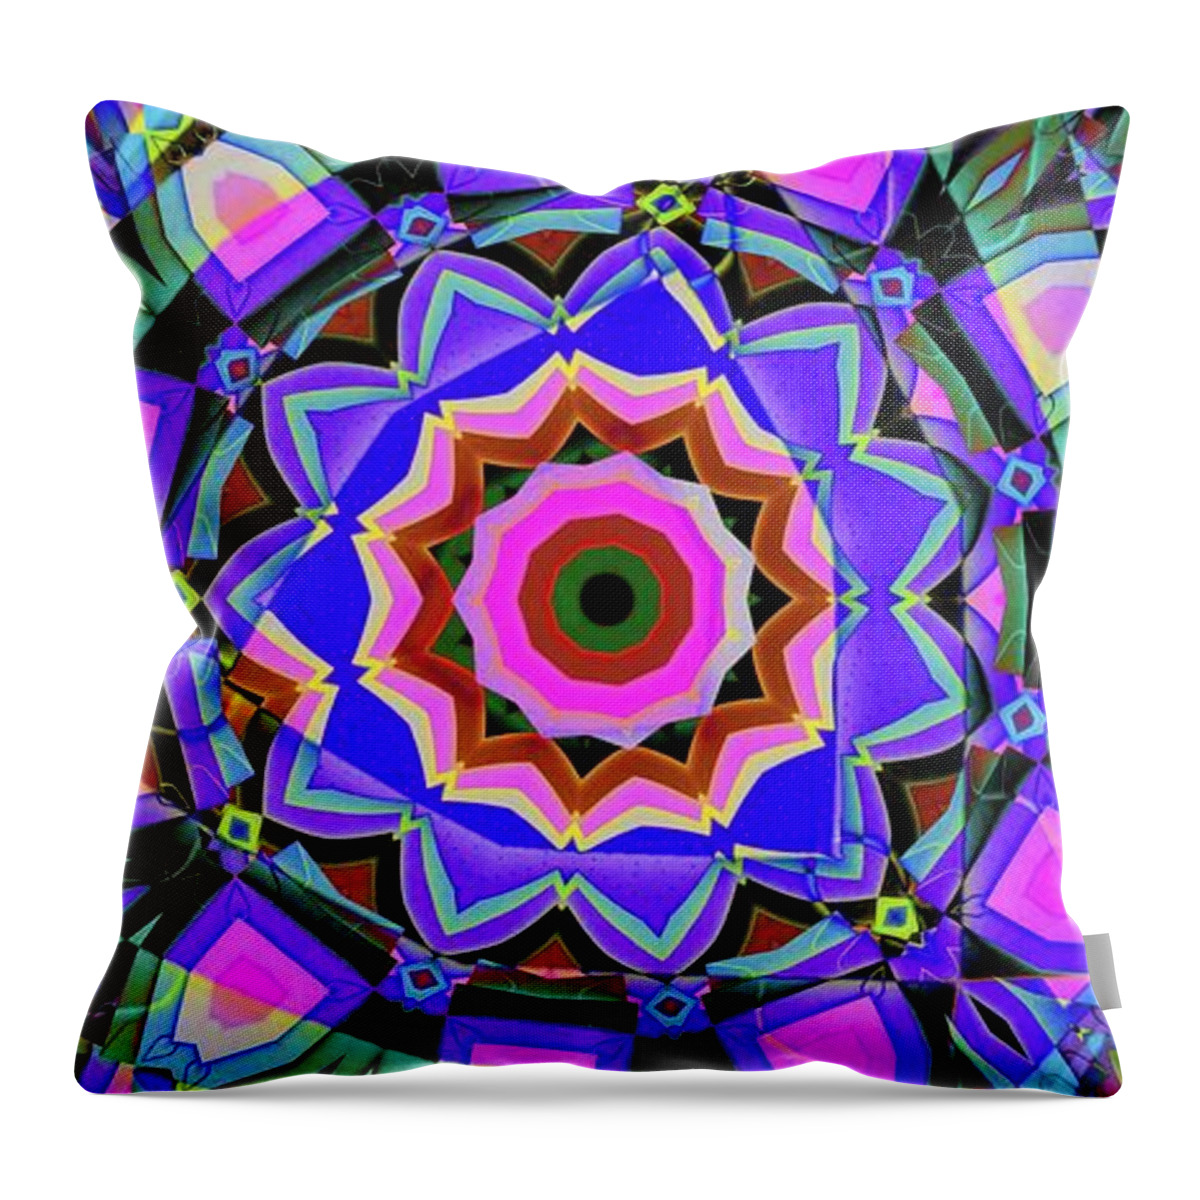 Abstract Throw Pillow featuring the digital art Colors O're Laid by Ron Bissett